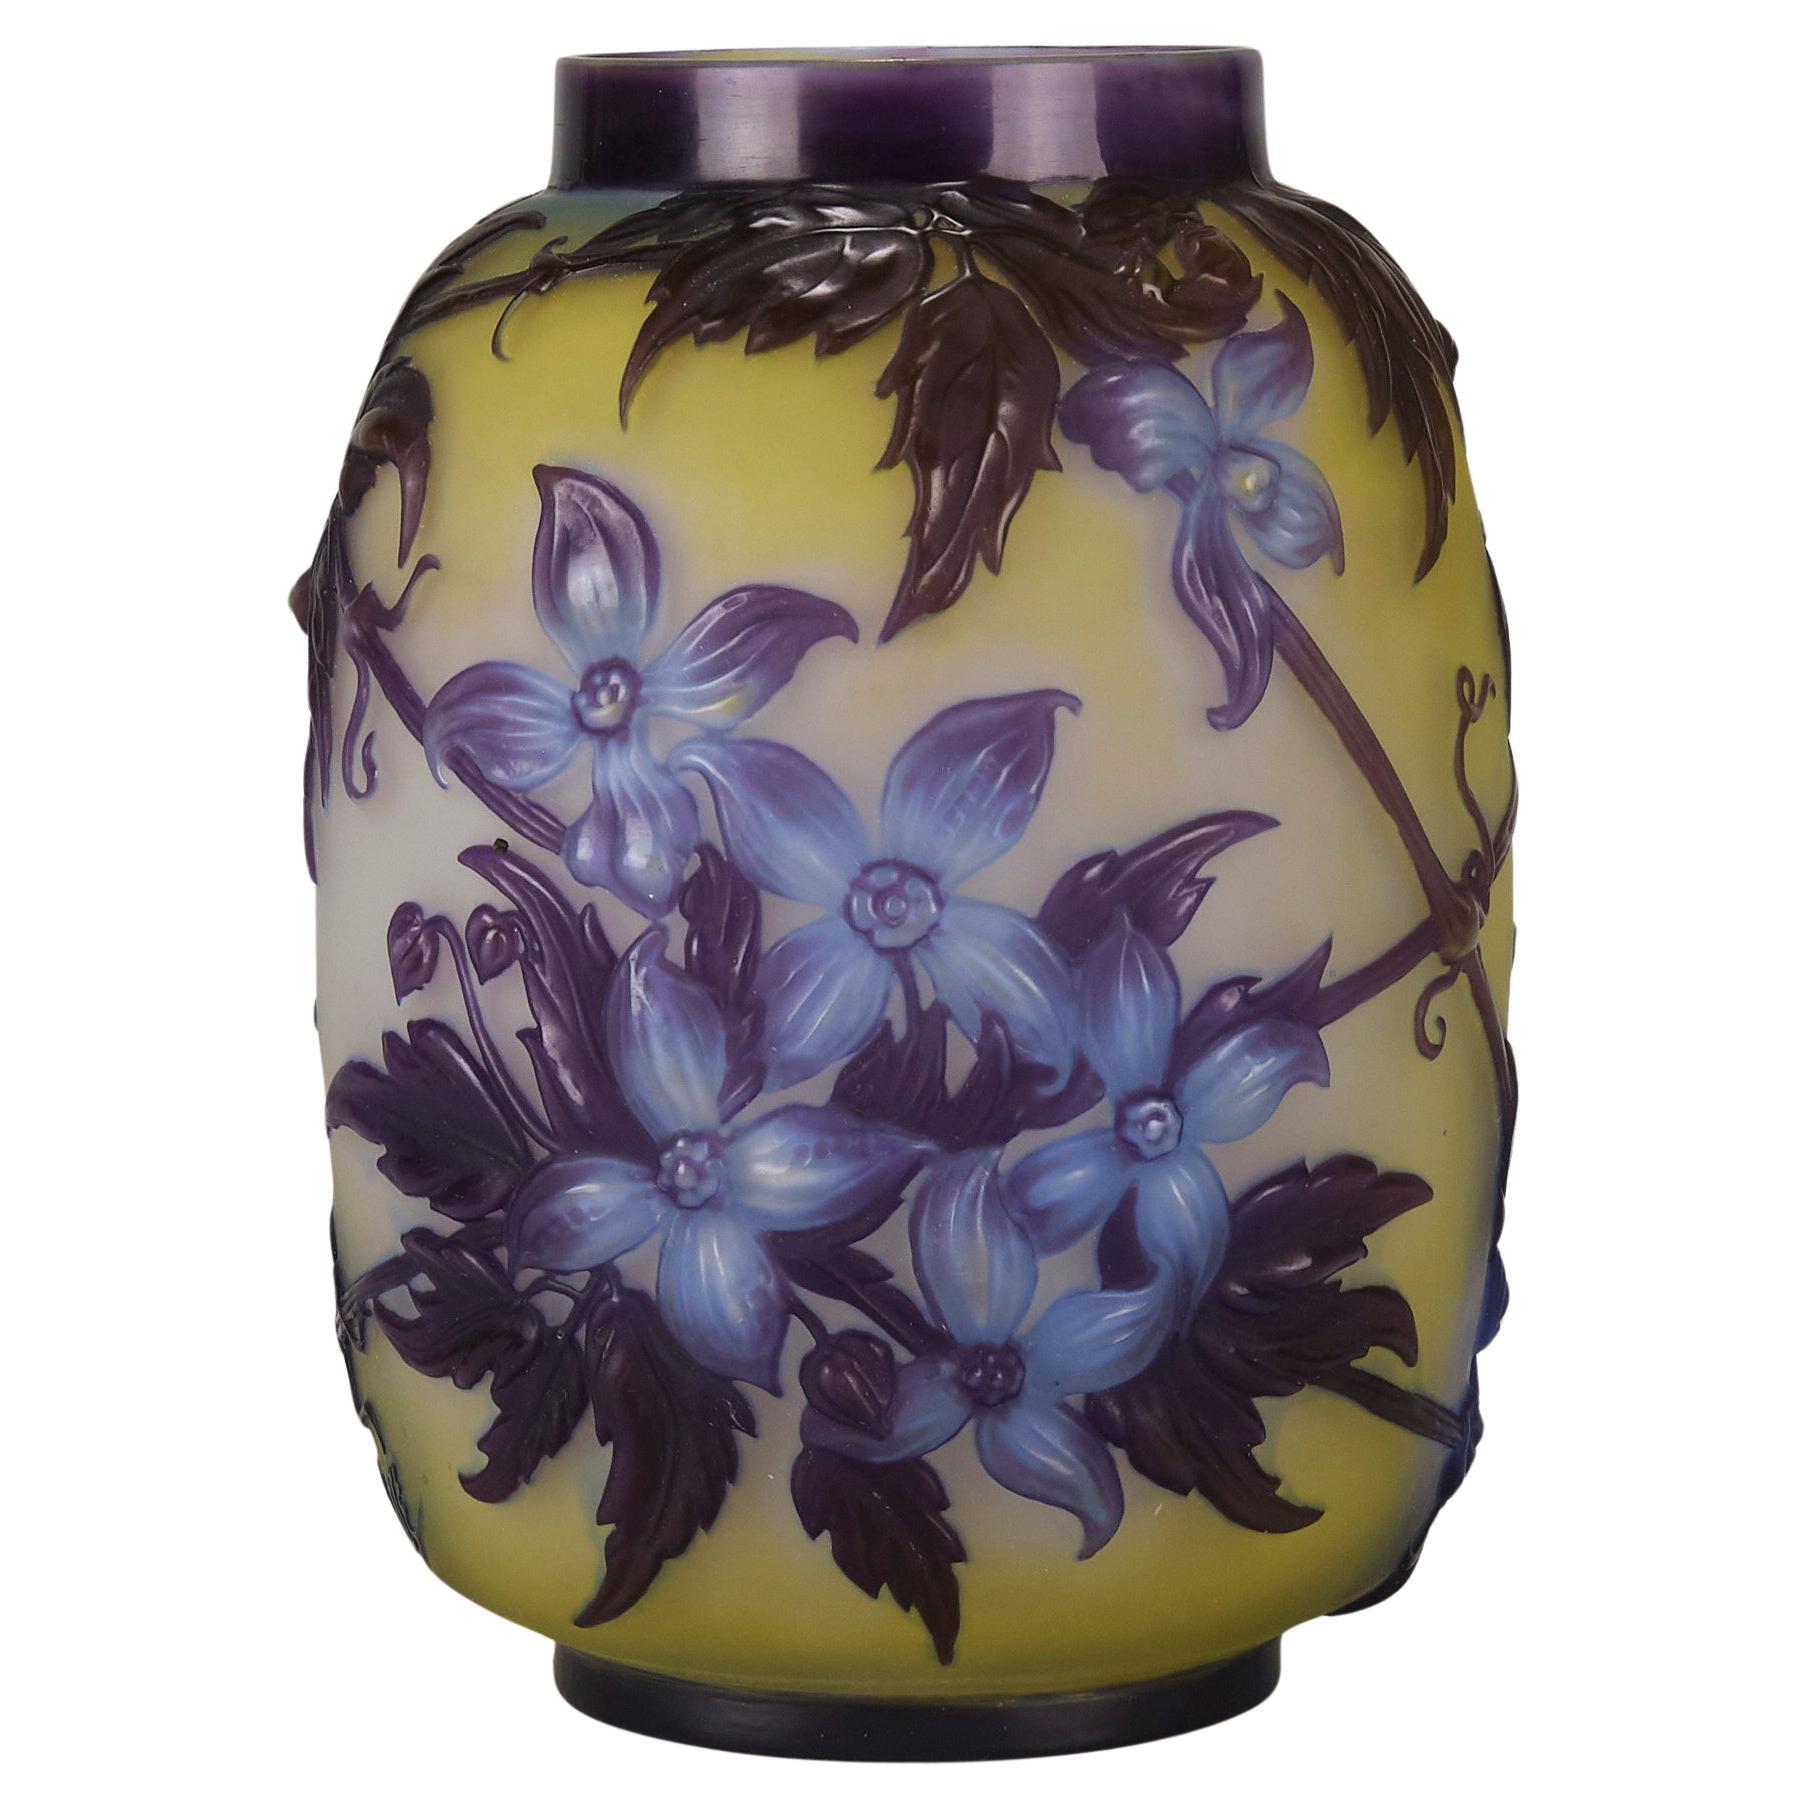 Early 20th French Cameo Glass Vase entitled "Clematis Vase" by Emille Galle For Sale